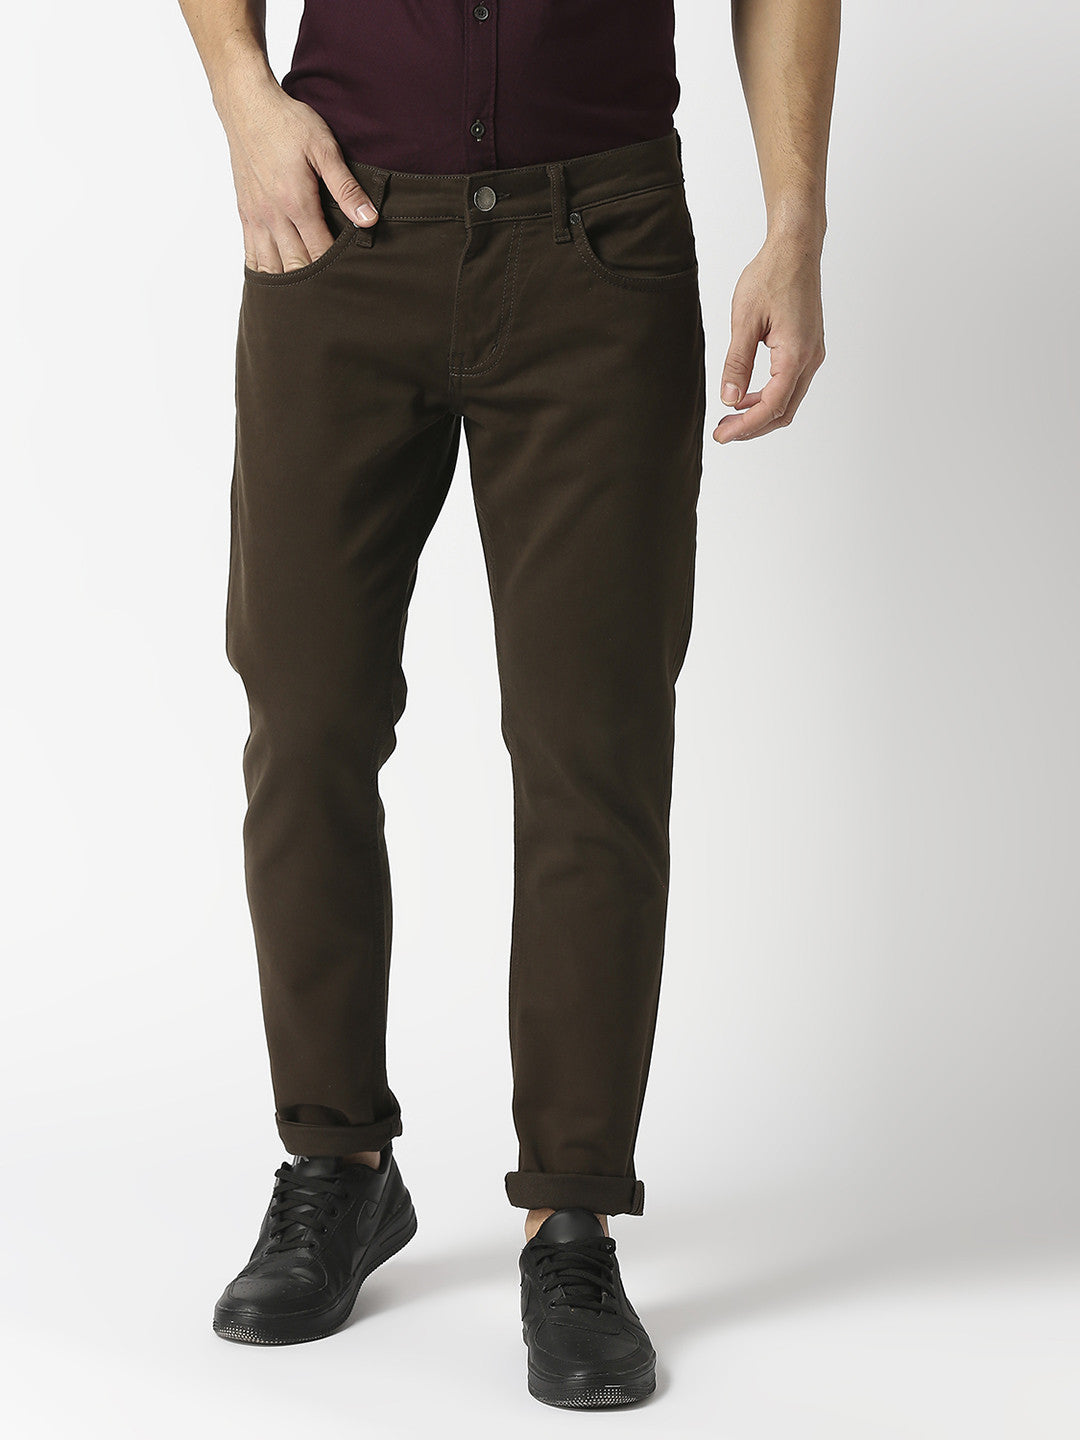 Army Green Slim Tapered Cotton Stretch Jeans